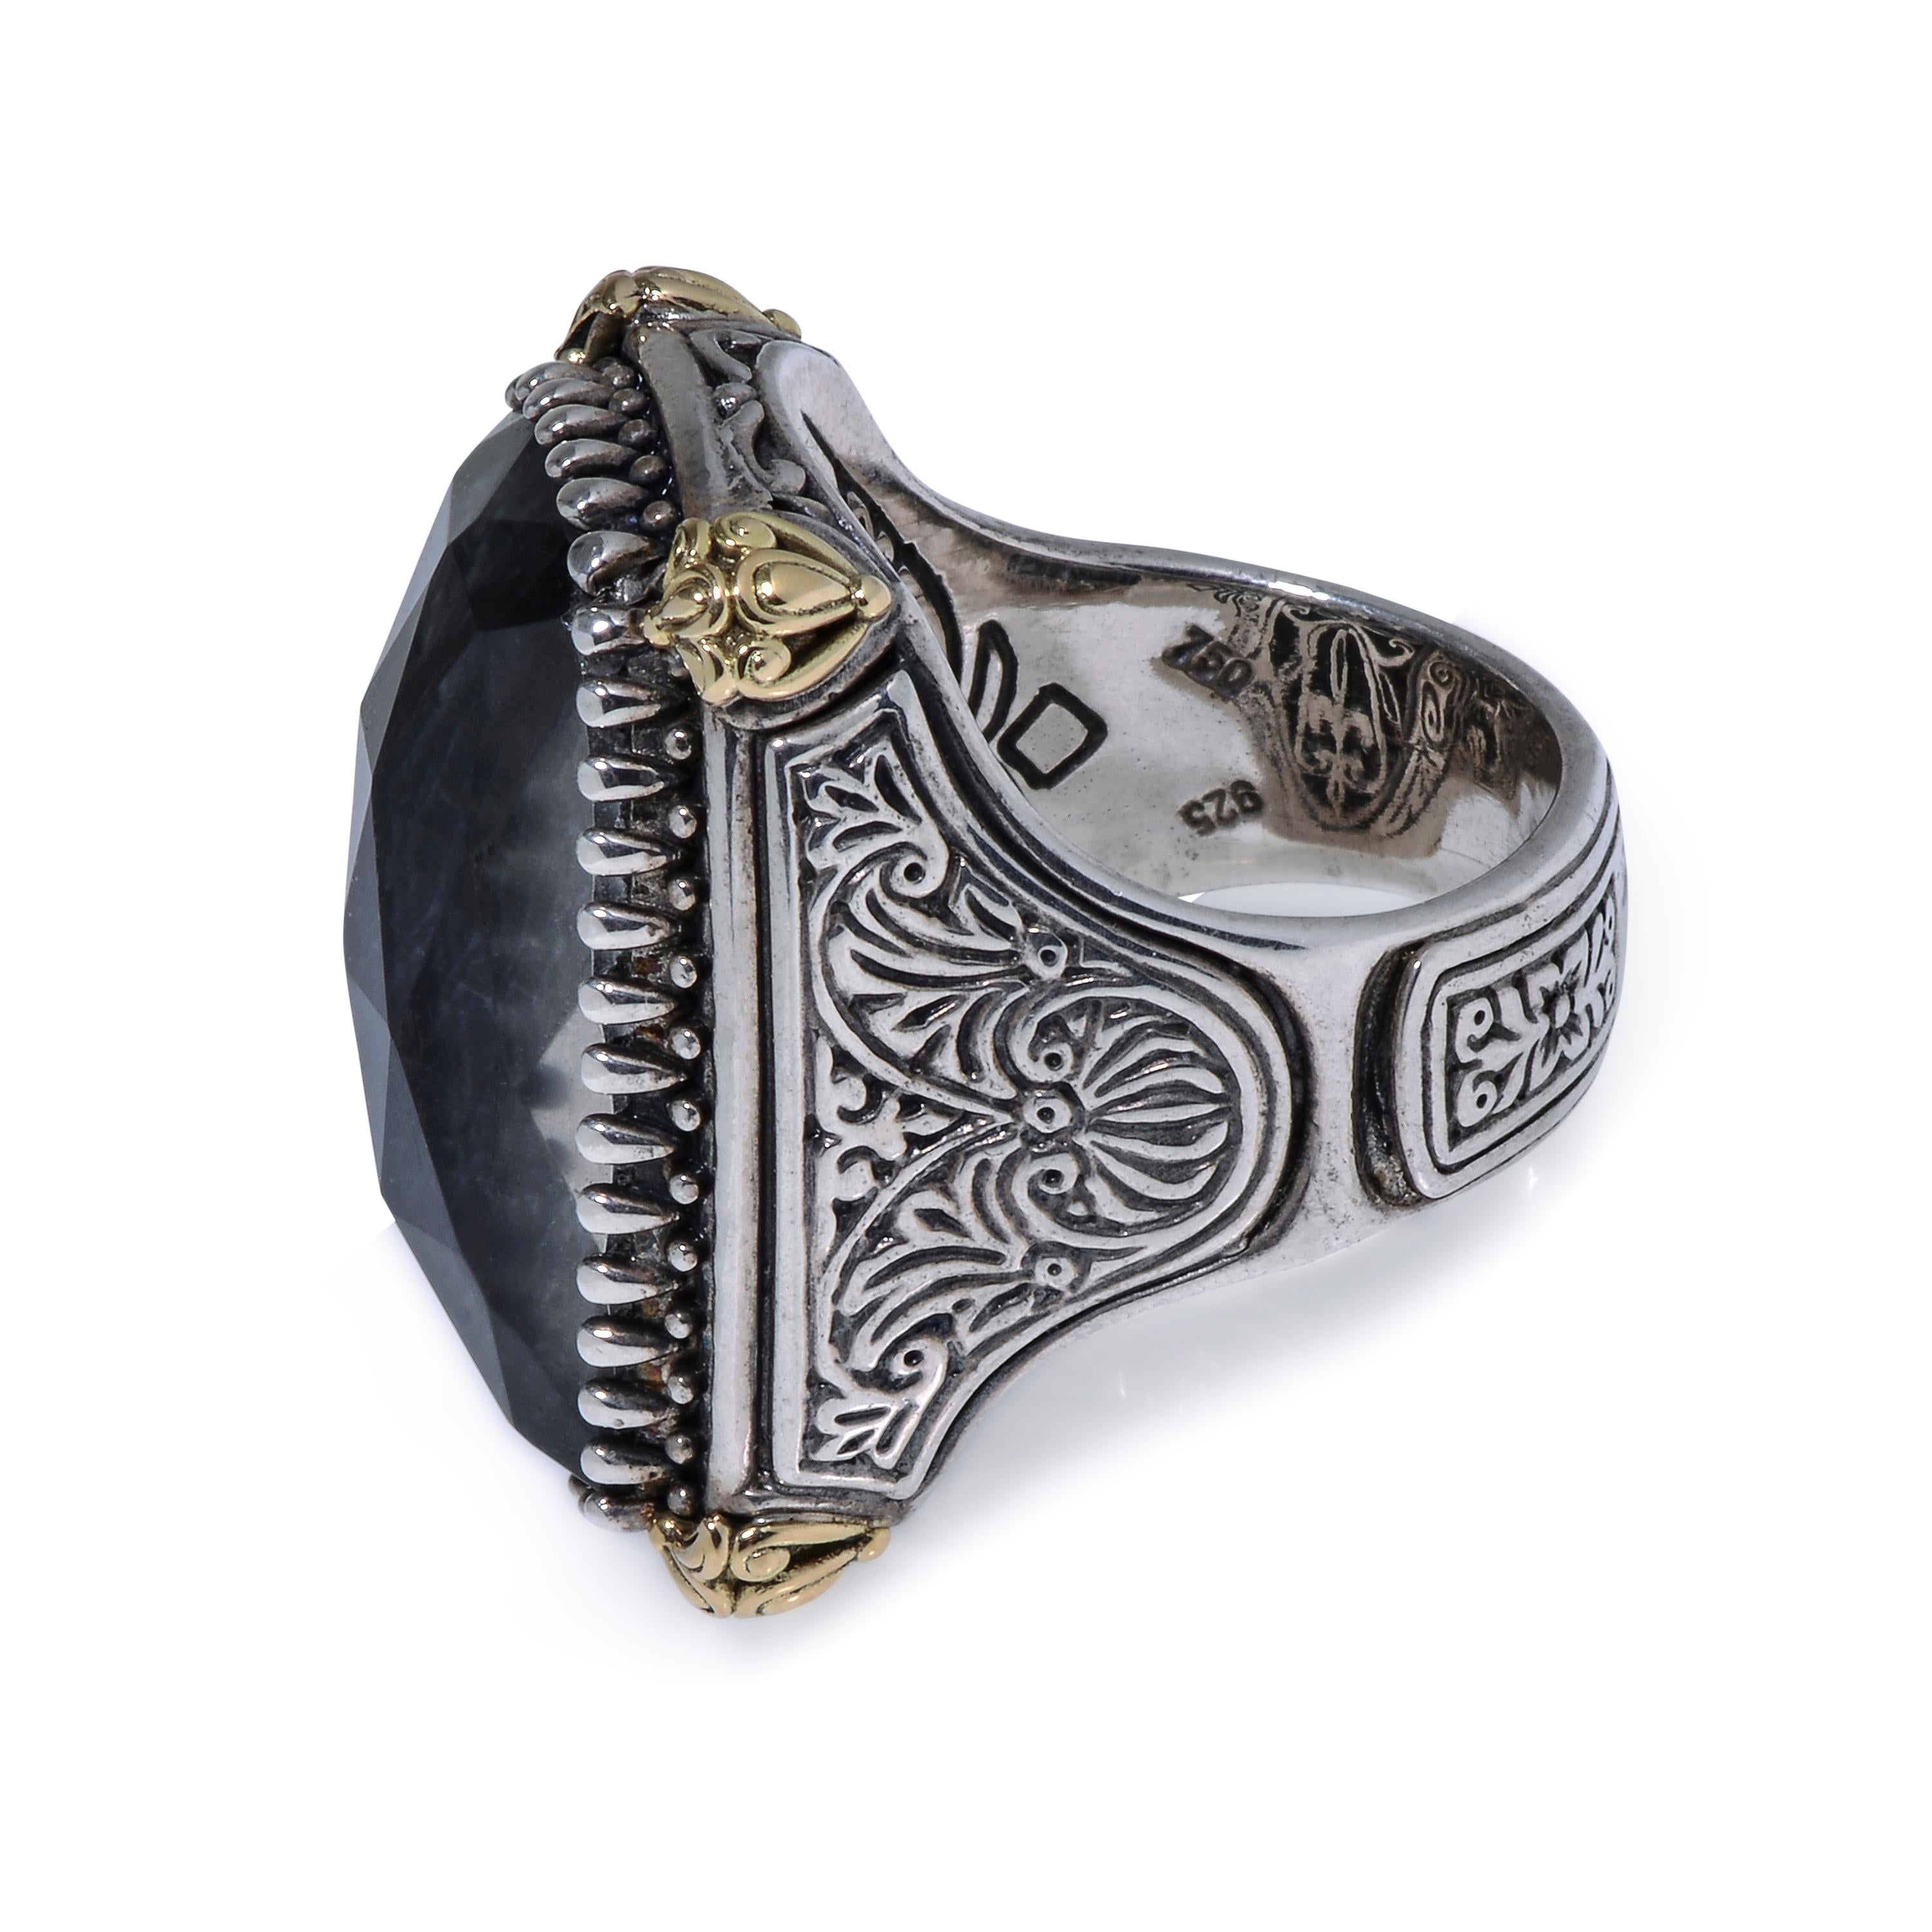 Contemporary Konstantino 18K Gold and Sterling Silver & Spectrolite Doublet Ring sz 7 For Sale